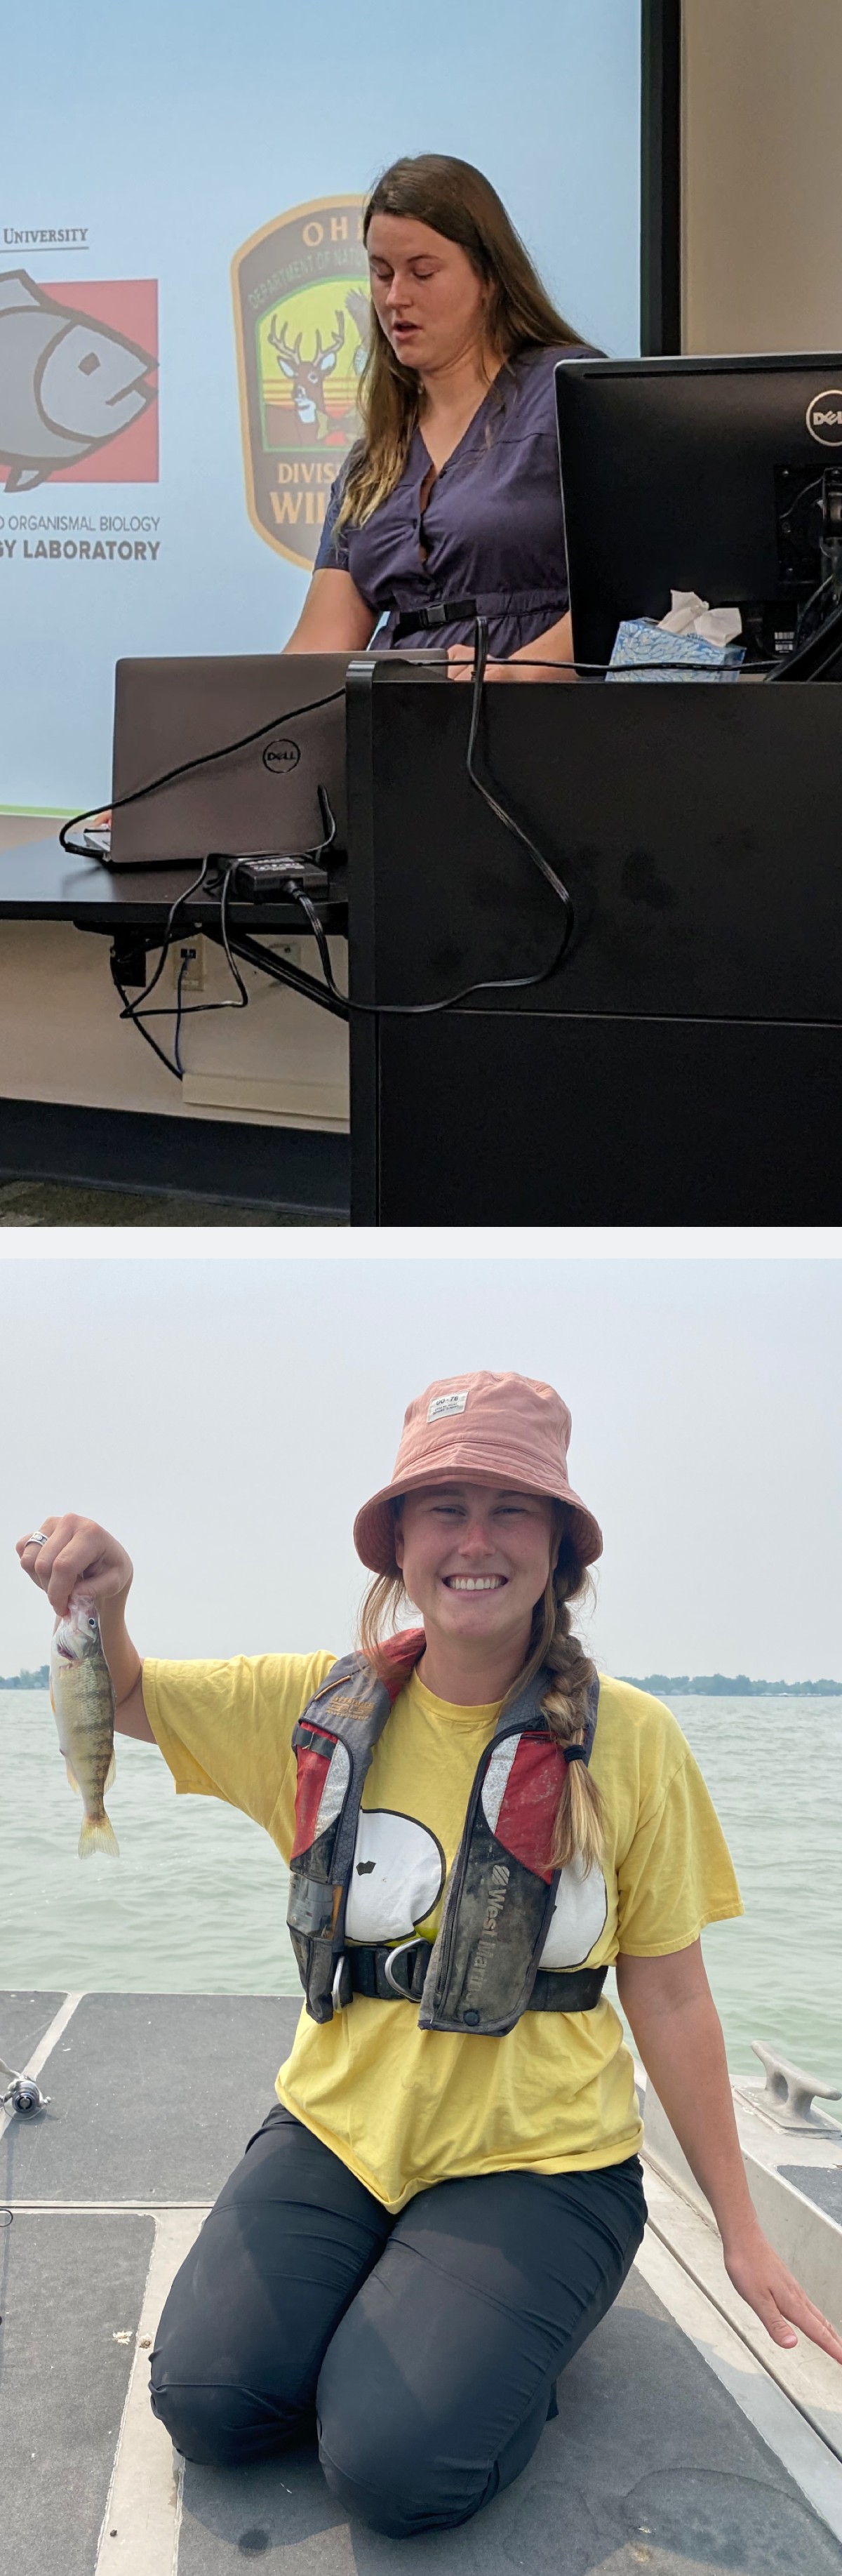 Top: Marley McLaughlin presenting her REU research; Bottom: Marley helping with field work 